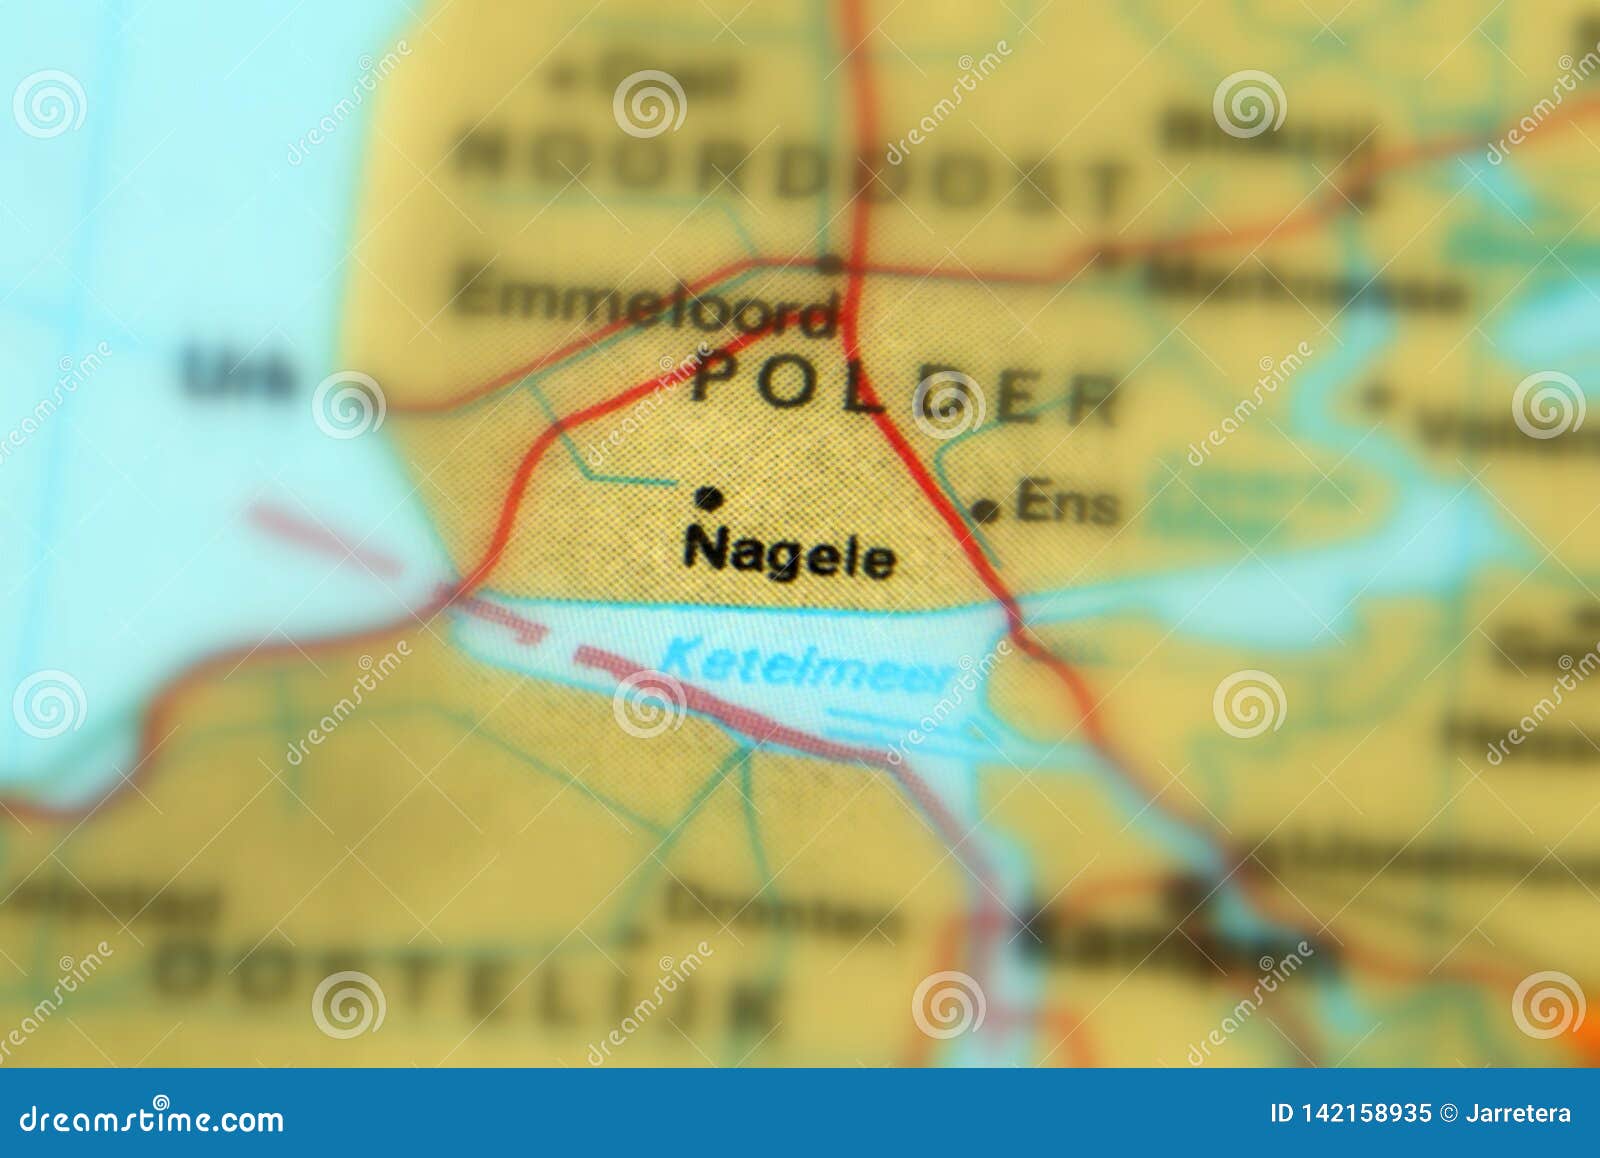 nagele, a town in the netherlands.